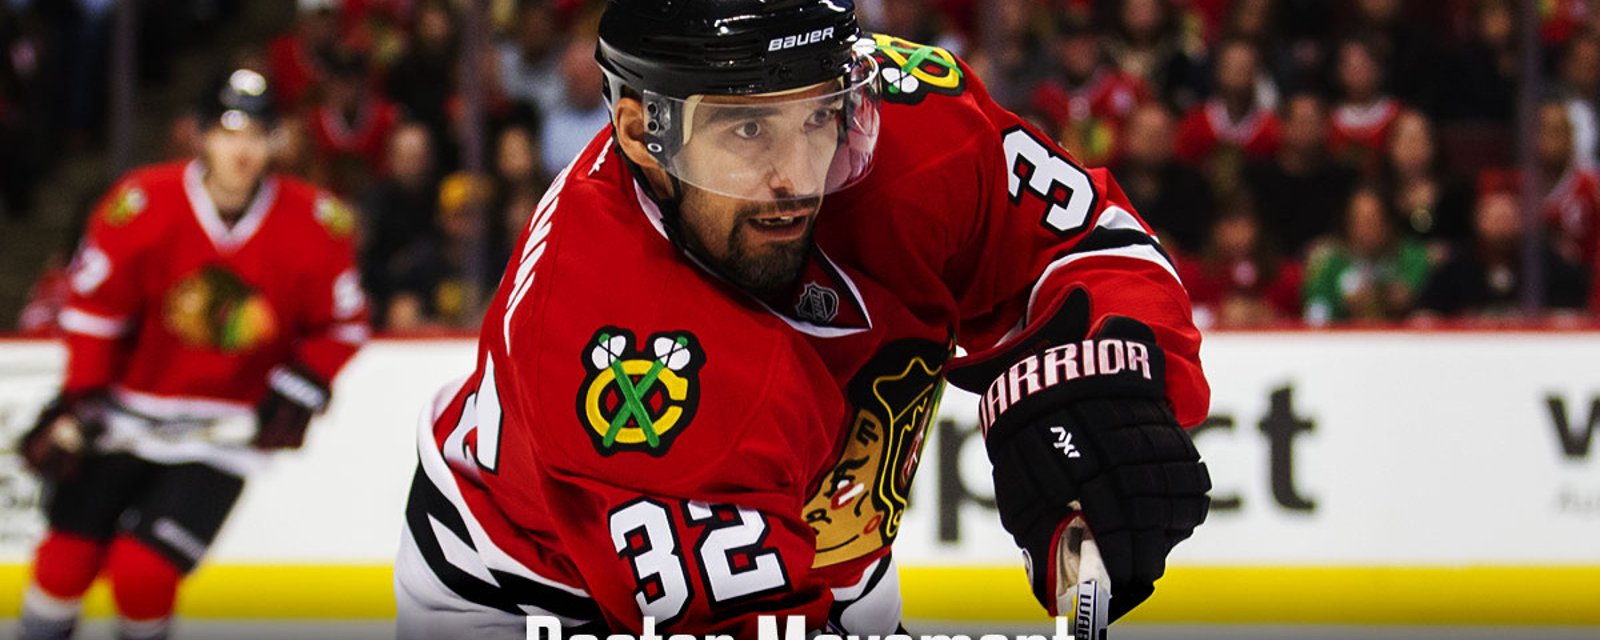 Roster movement: Rozsival placed on IR, Blackhaws called some reinforcement!